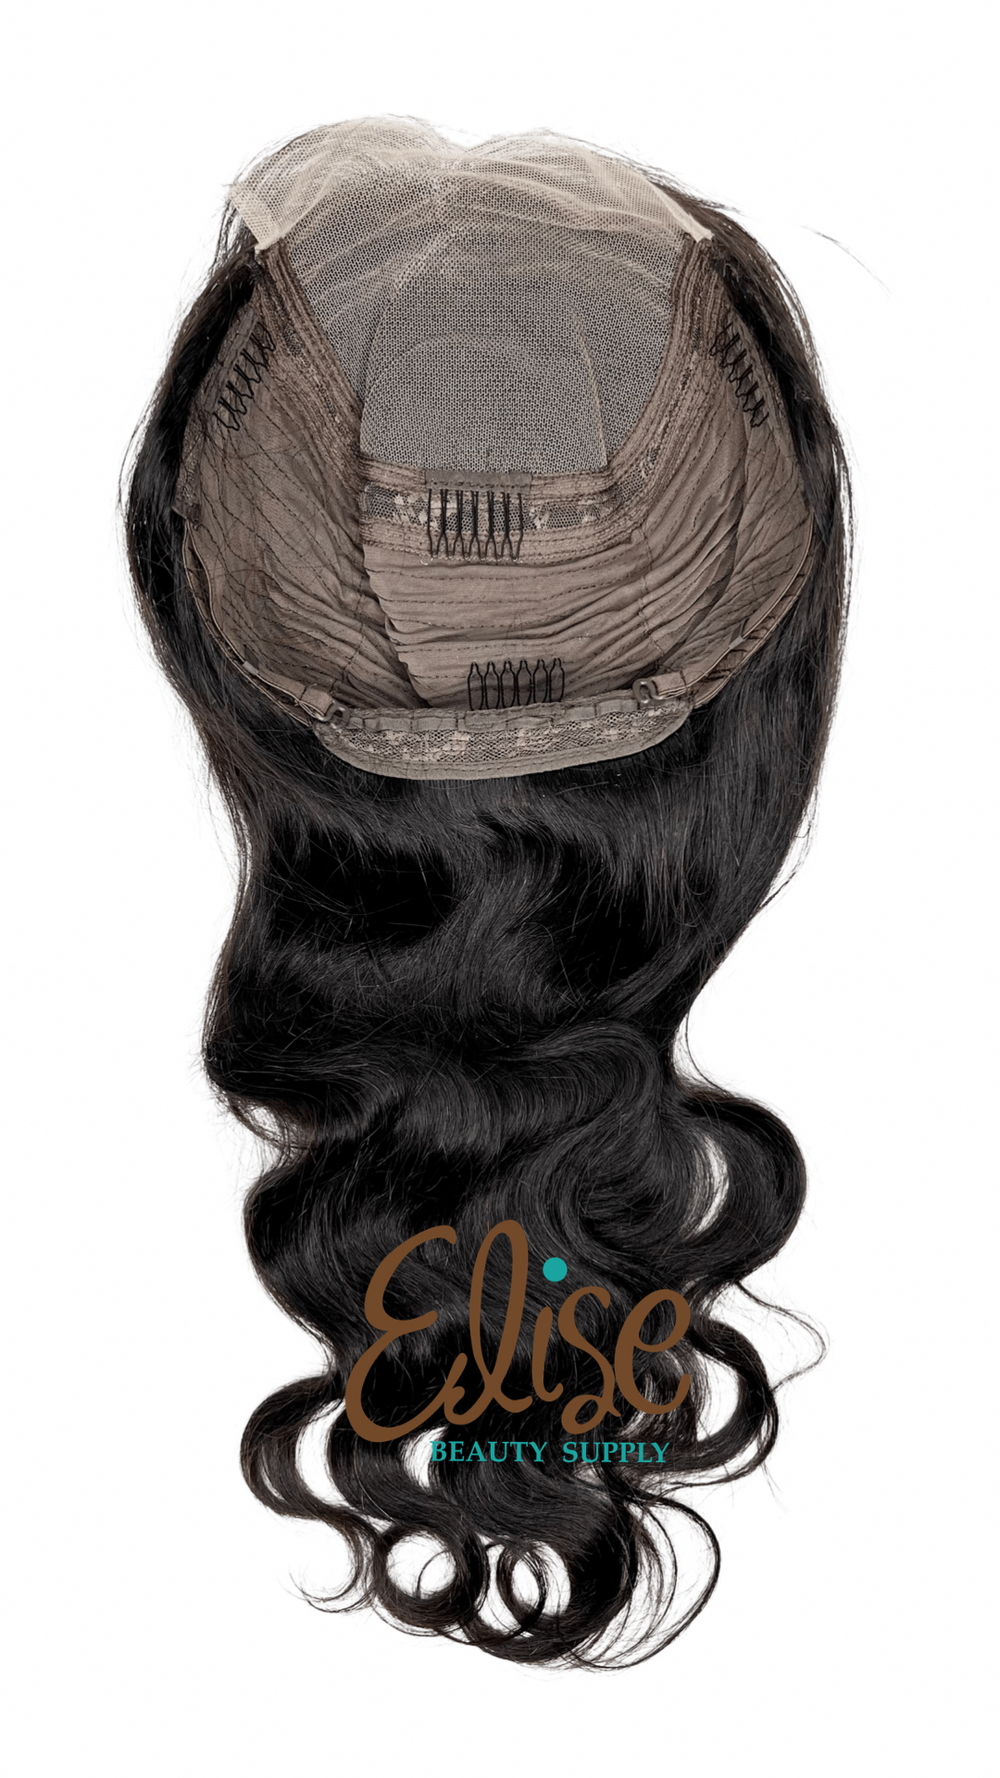 Customizing Your Look: Styling Options with Lace Front Human Hair Wigs